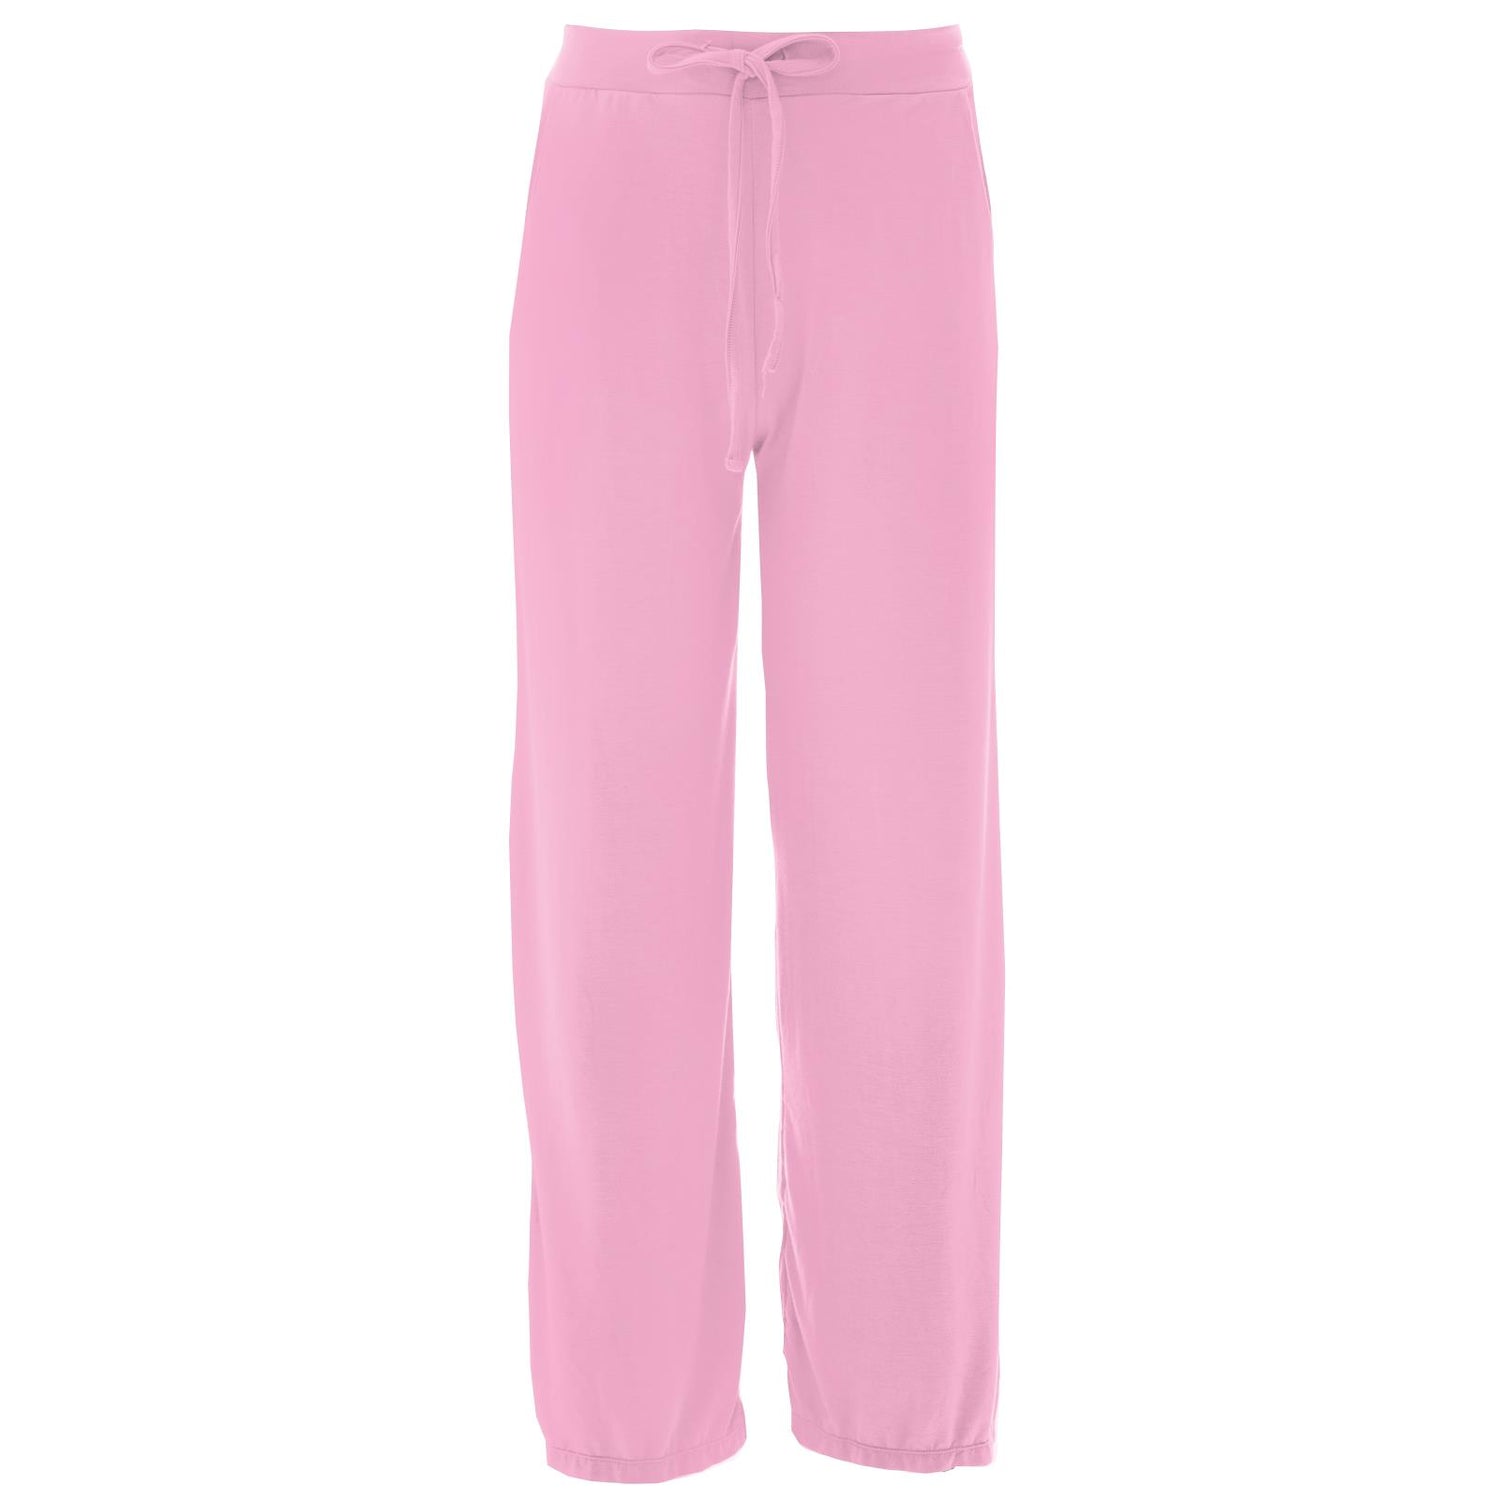 Women's Lounge Pants in Cotton Candy